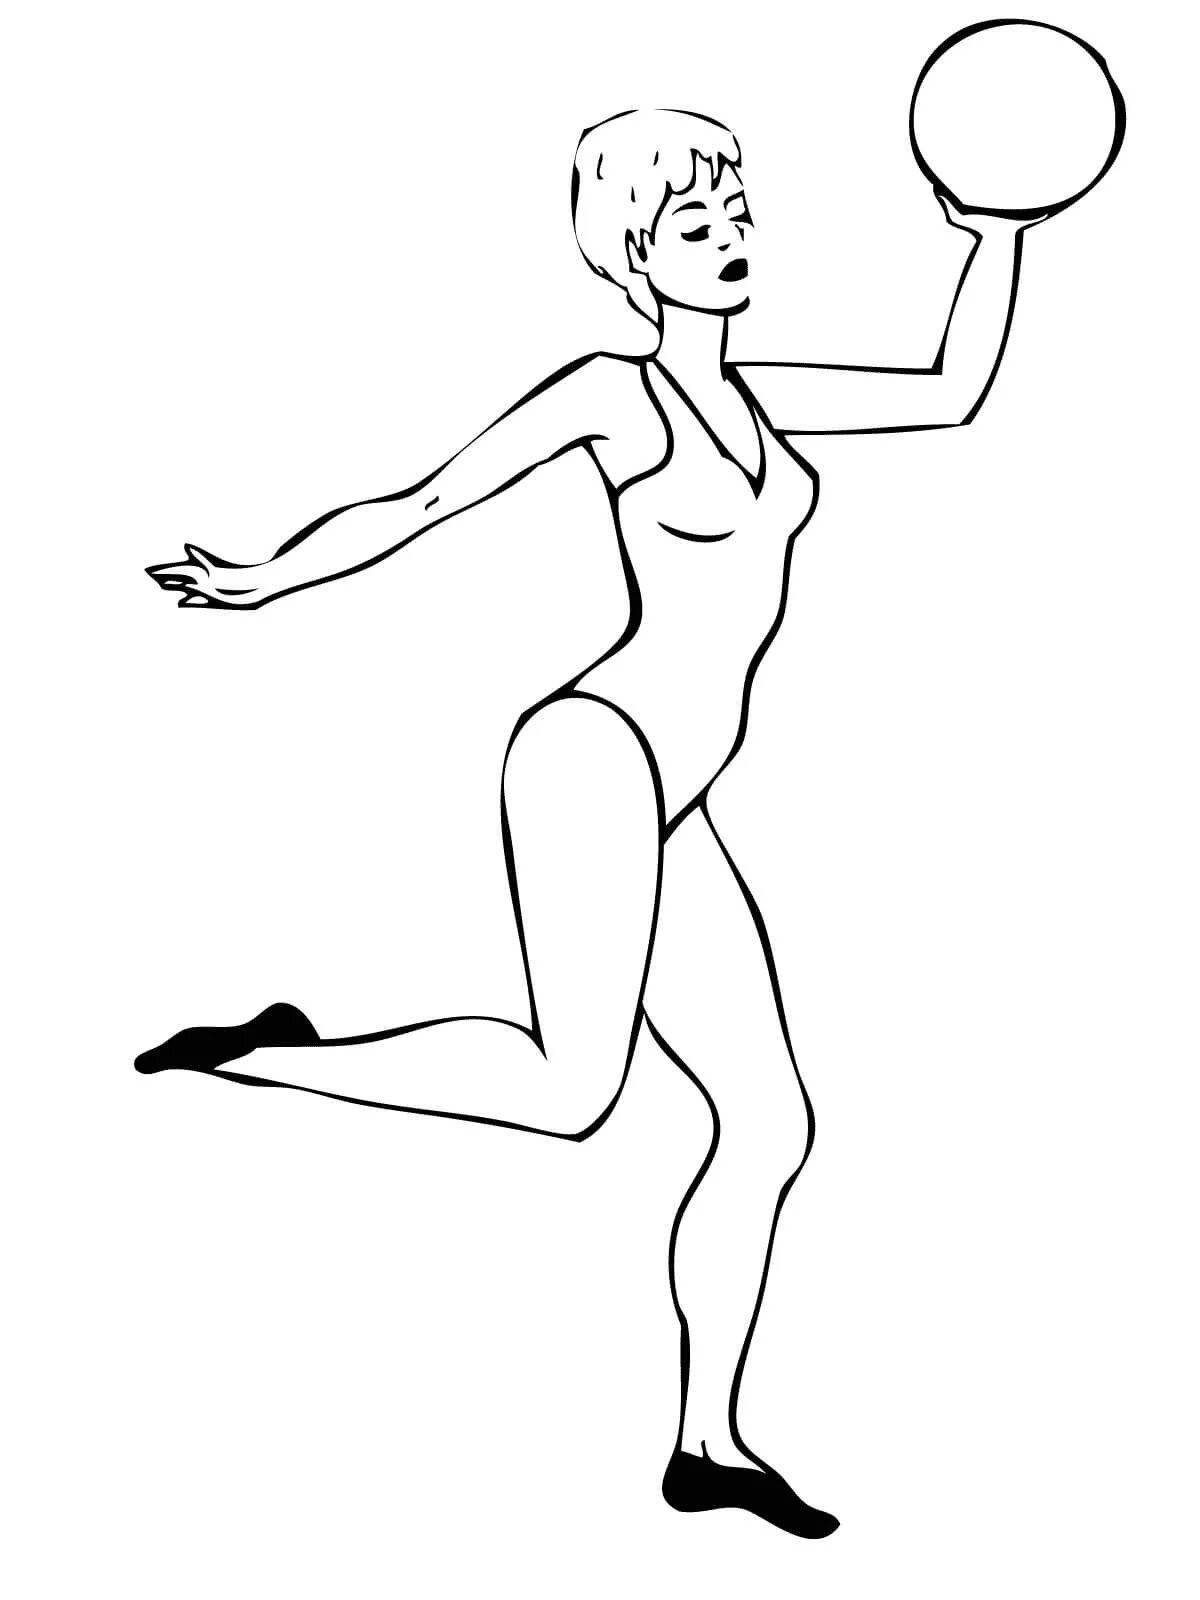 Graceful gymnast with a ball